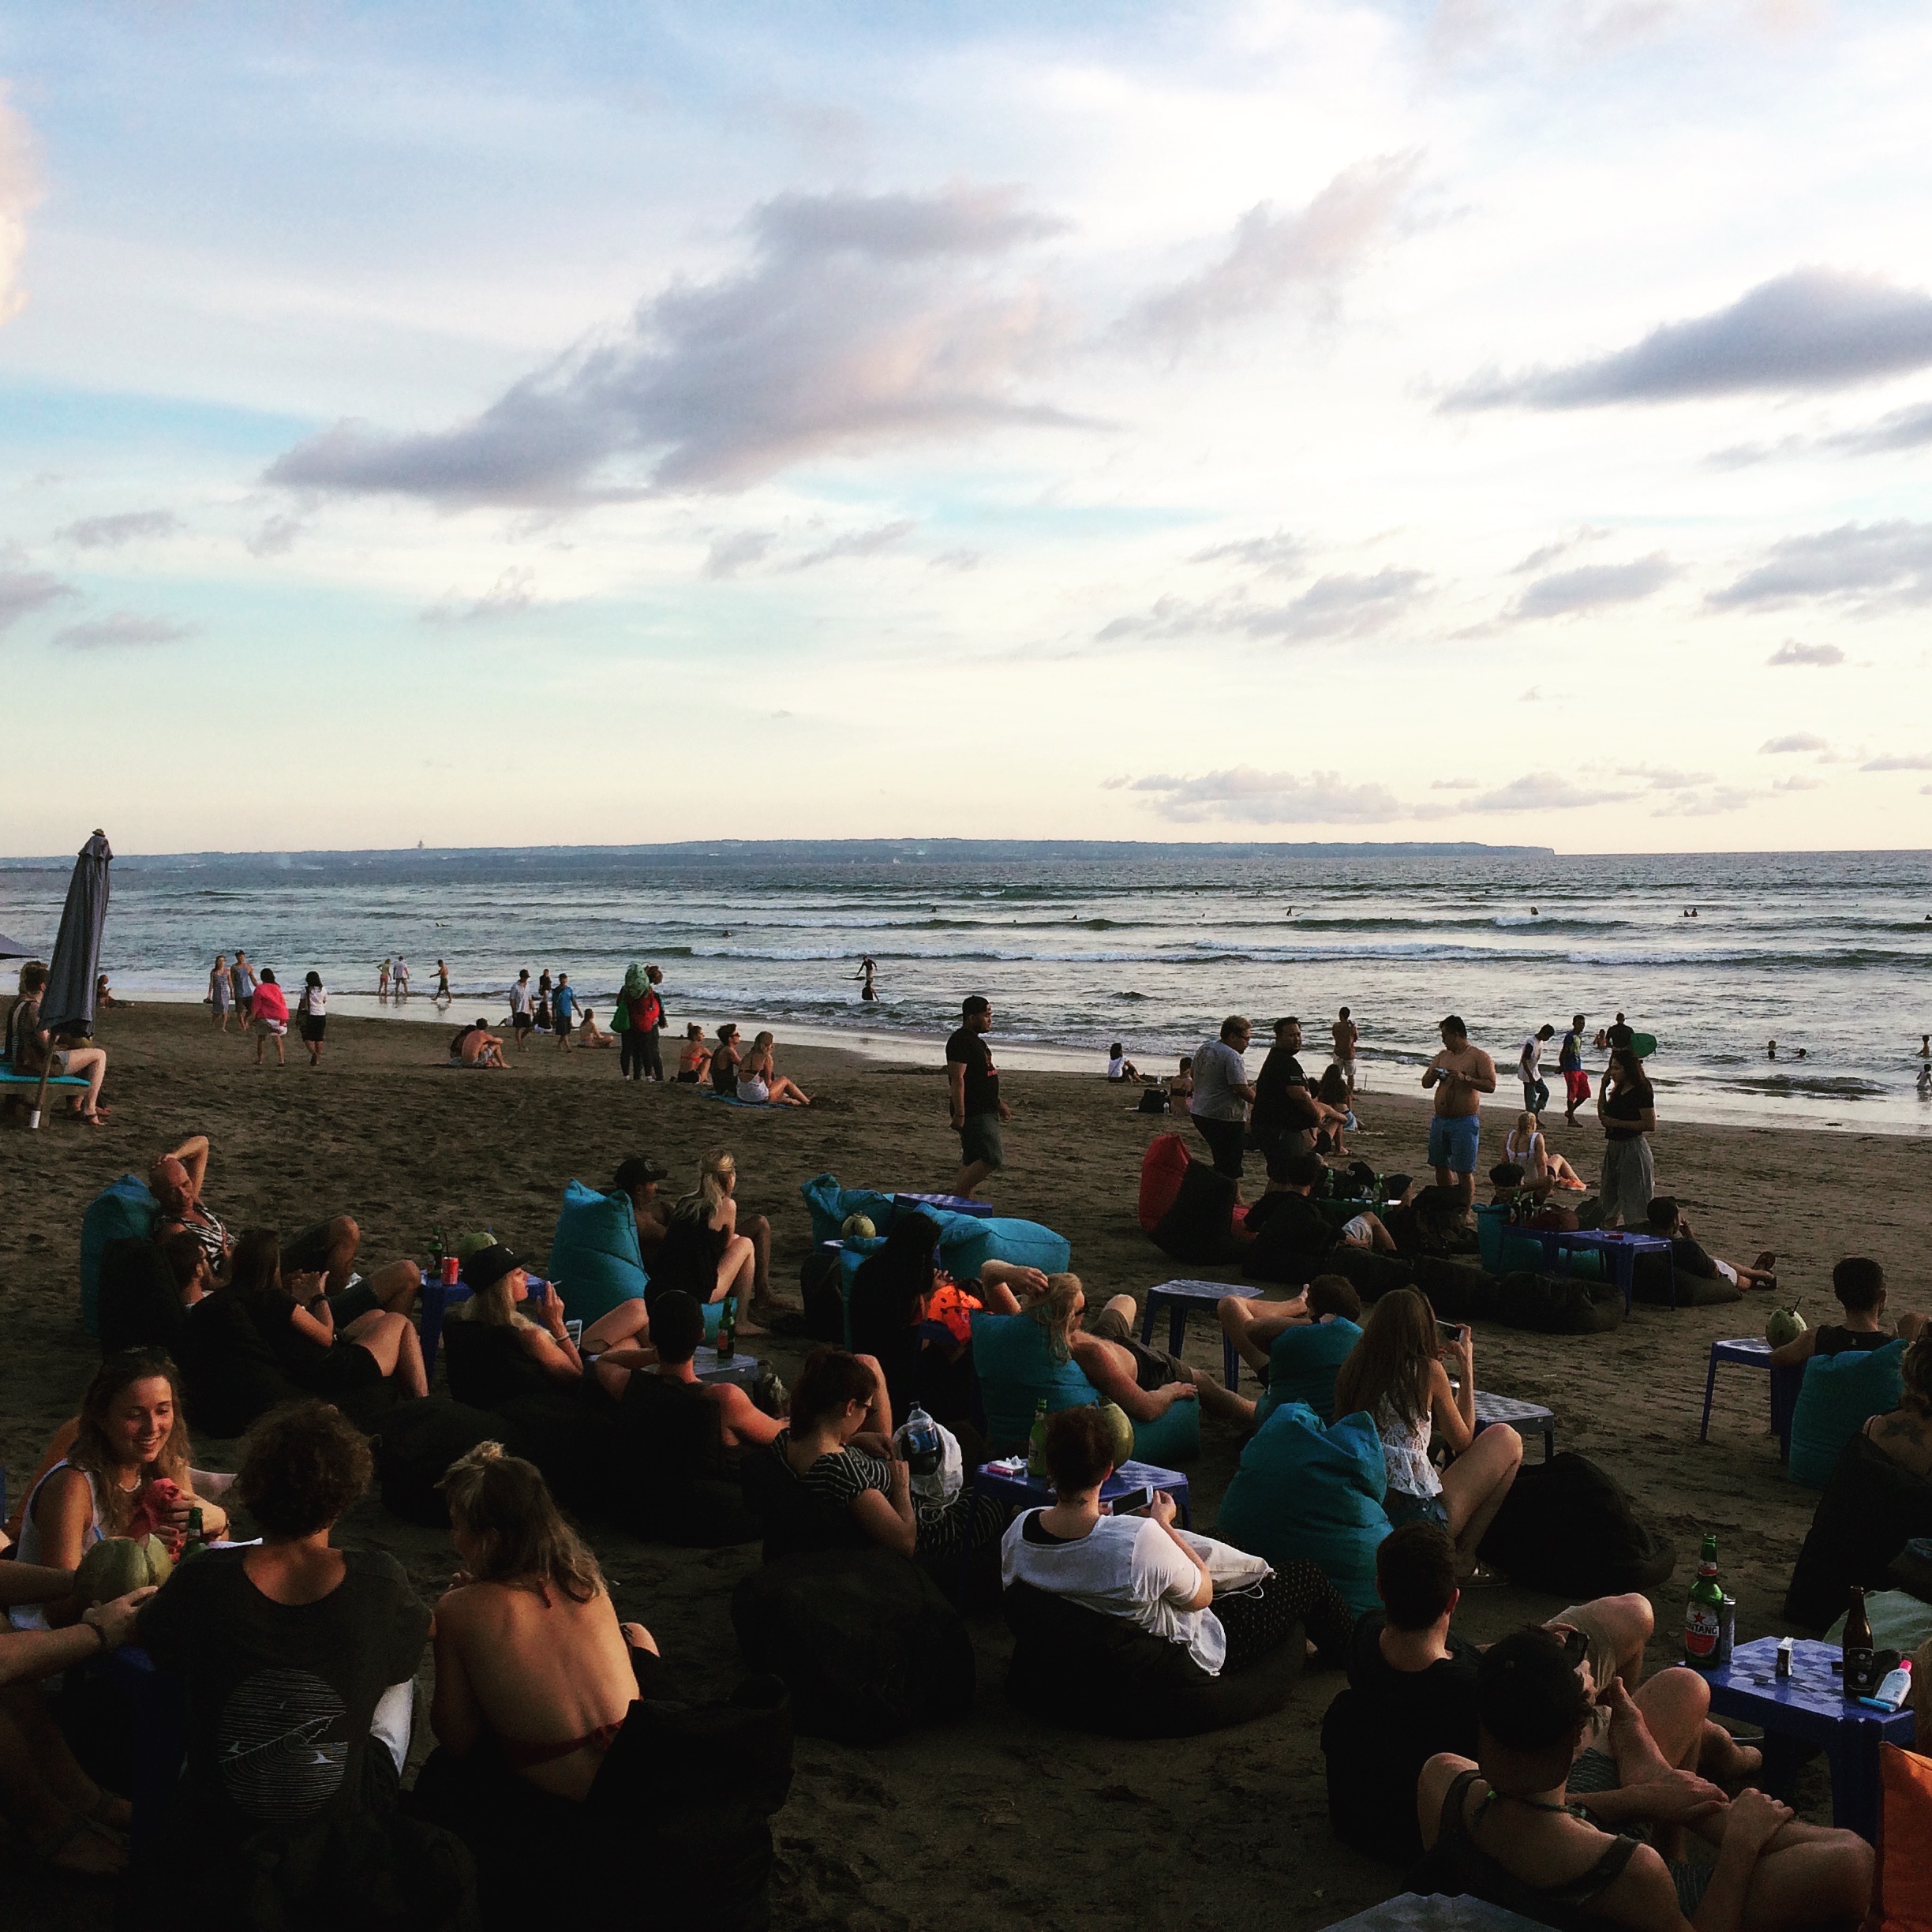 People sitting on bean bags and drinking on the beach. They are waiting for the sunset in Bali.